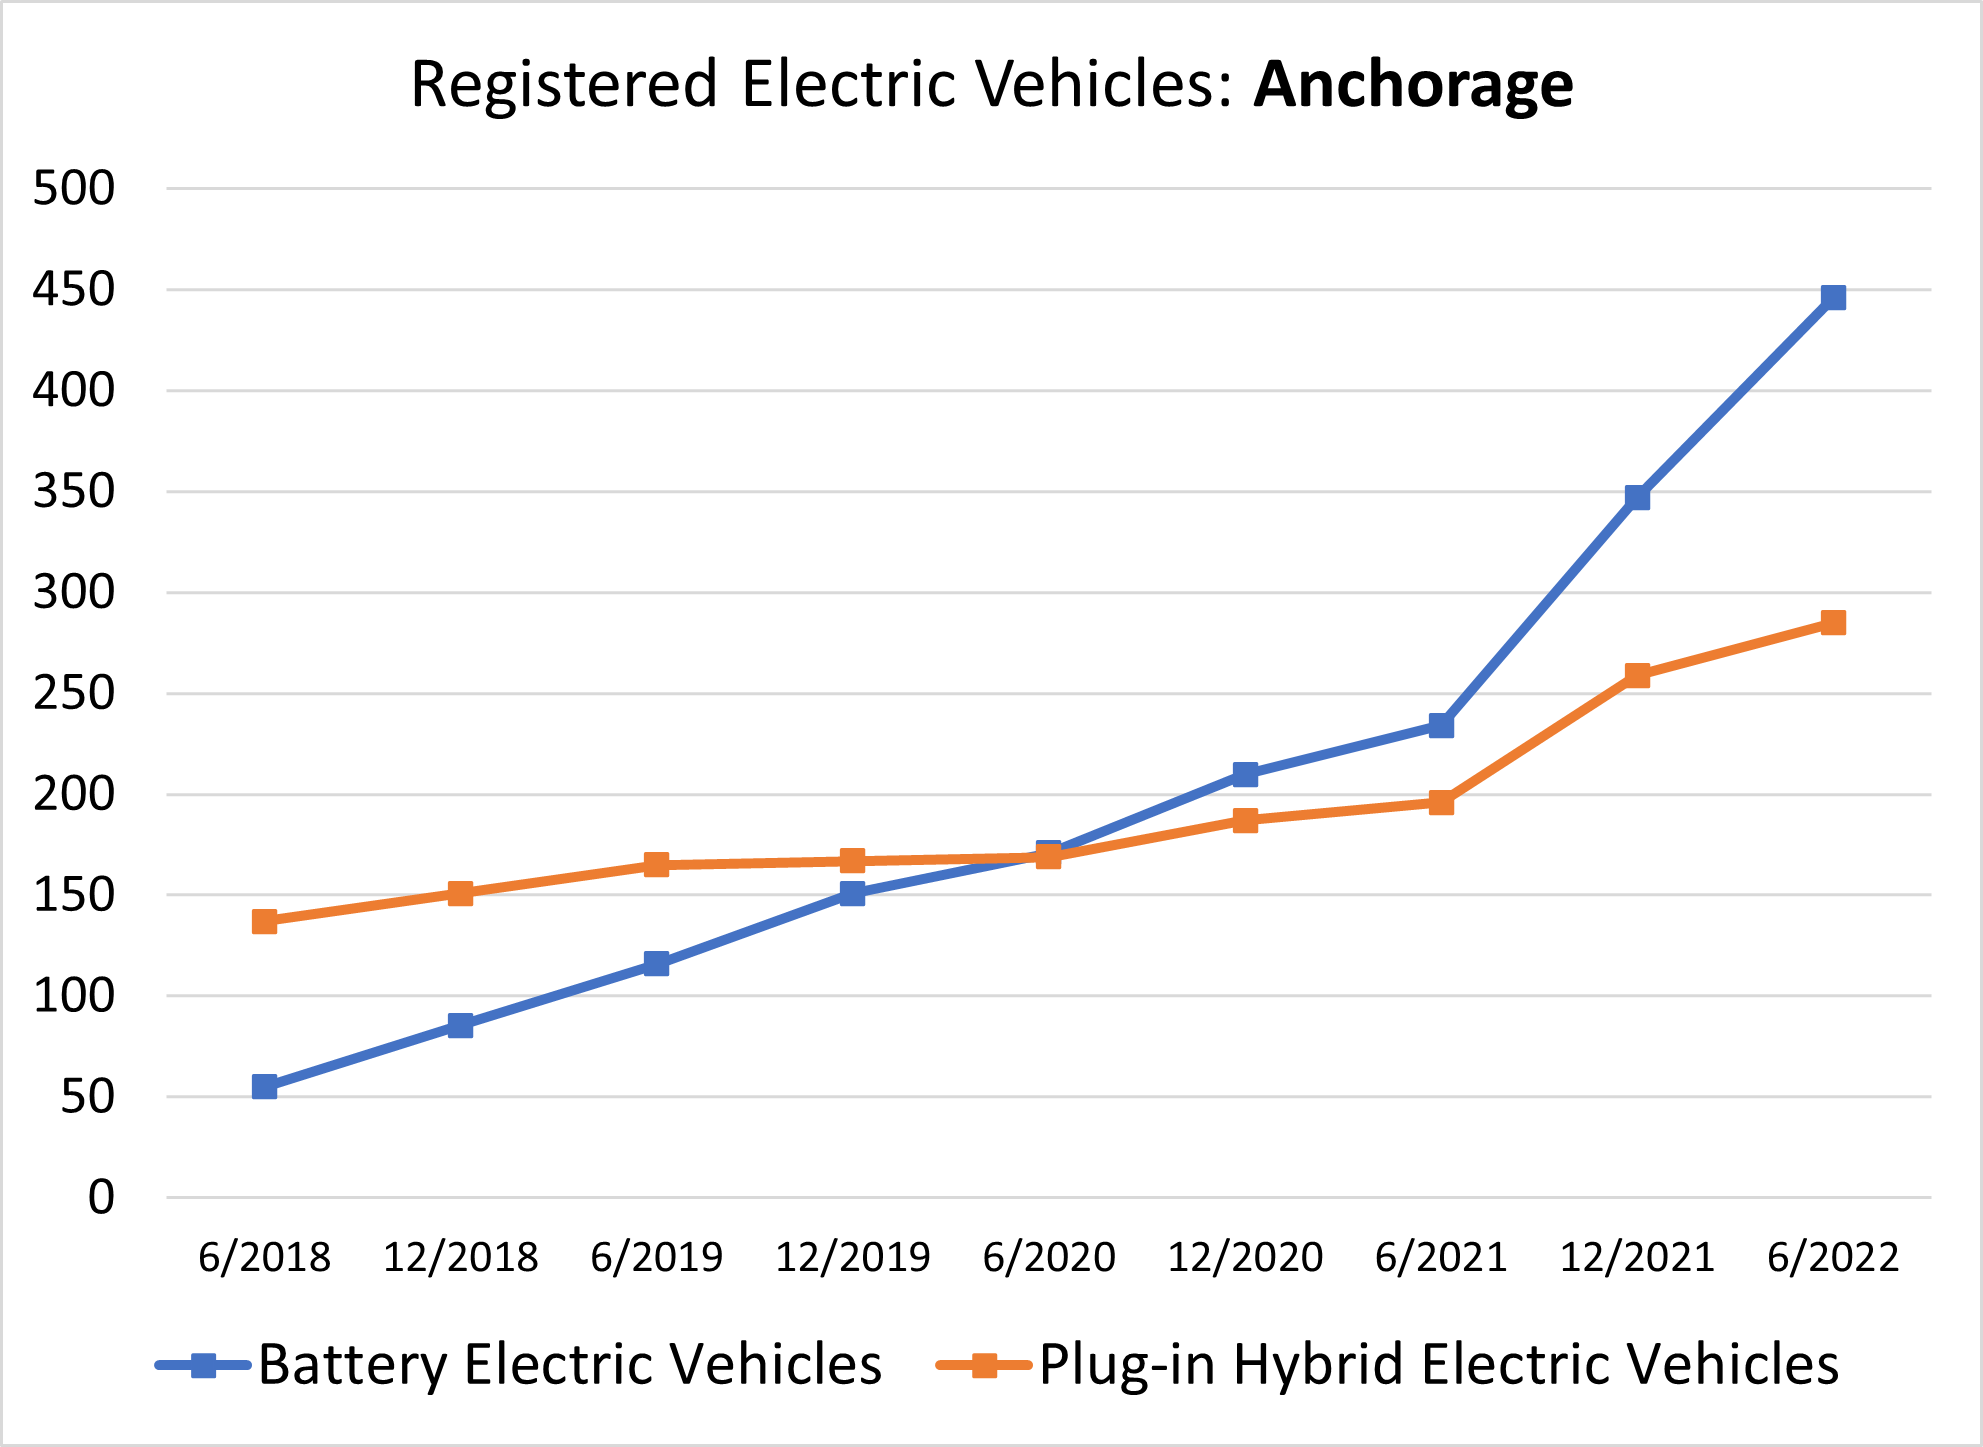 Registered Electric Vehicles in Municipality of Anchorage June 2018 to June 2022